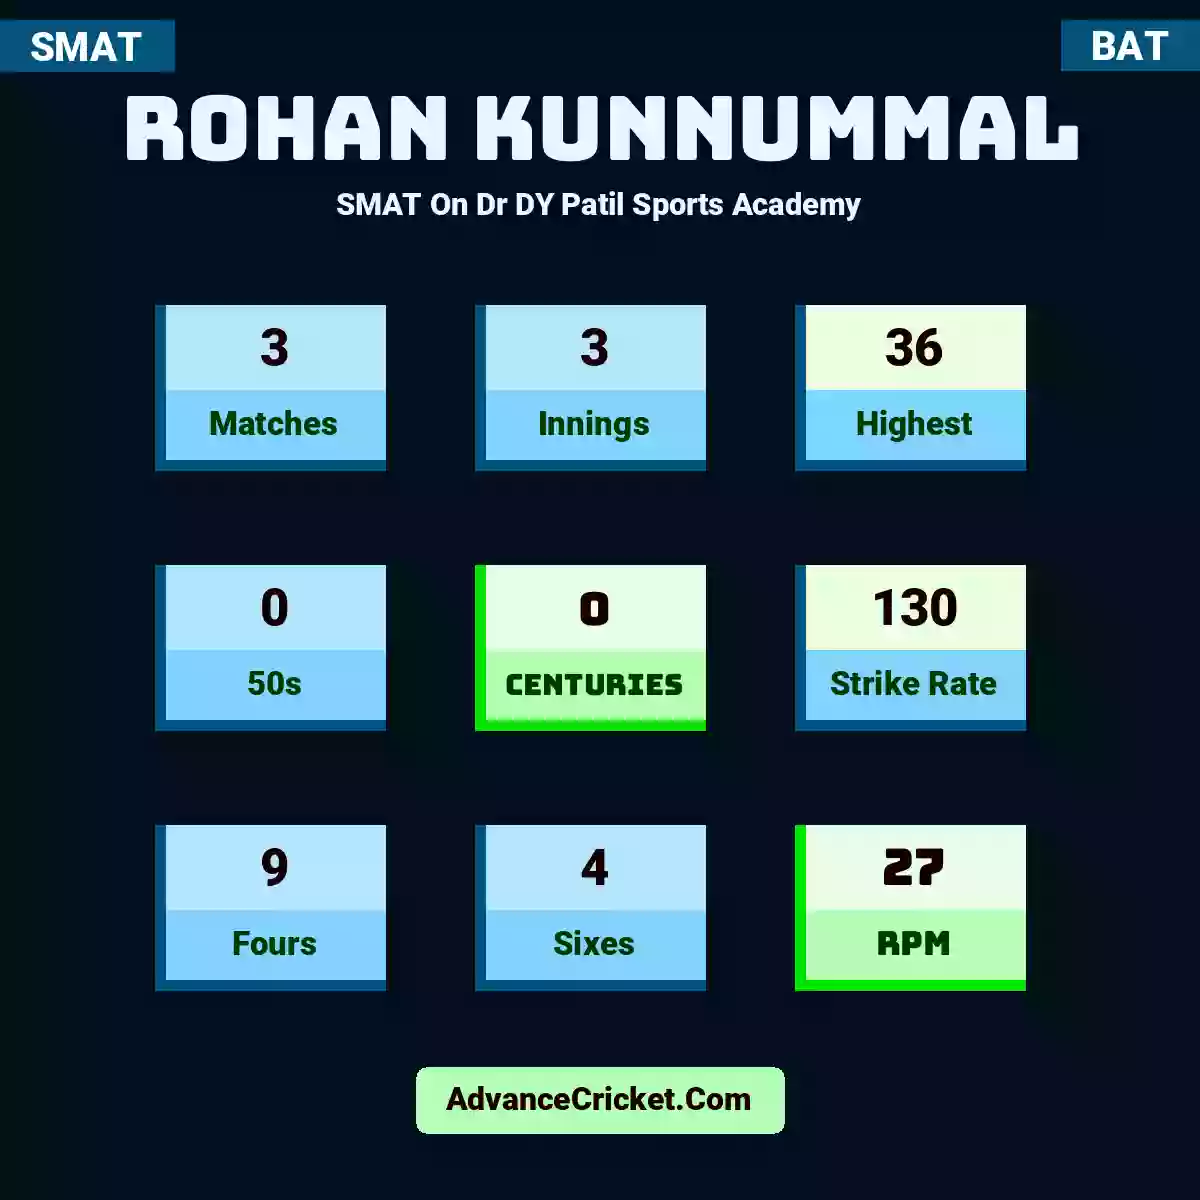 Rohan Kunnummal SMAT  On Dr DY Patil Sports Academy, Rohan Kunnummal played 3 matches, scored 36 runs as highest, 0 half-centuries, and 0 centuries, with a strike rate of 130. R.Kunnummal hit 9 fours and 4 sixes, with an RPM of 27.